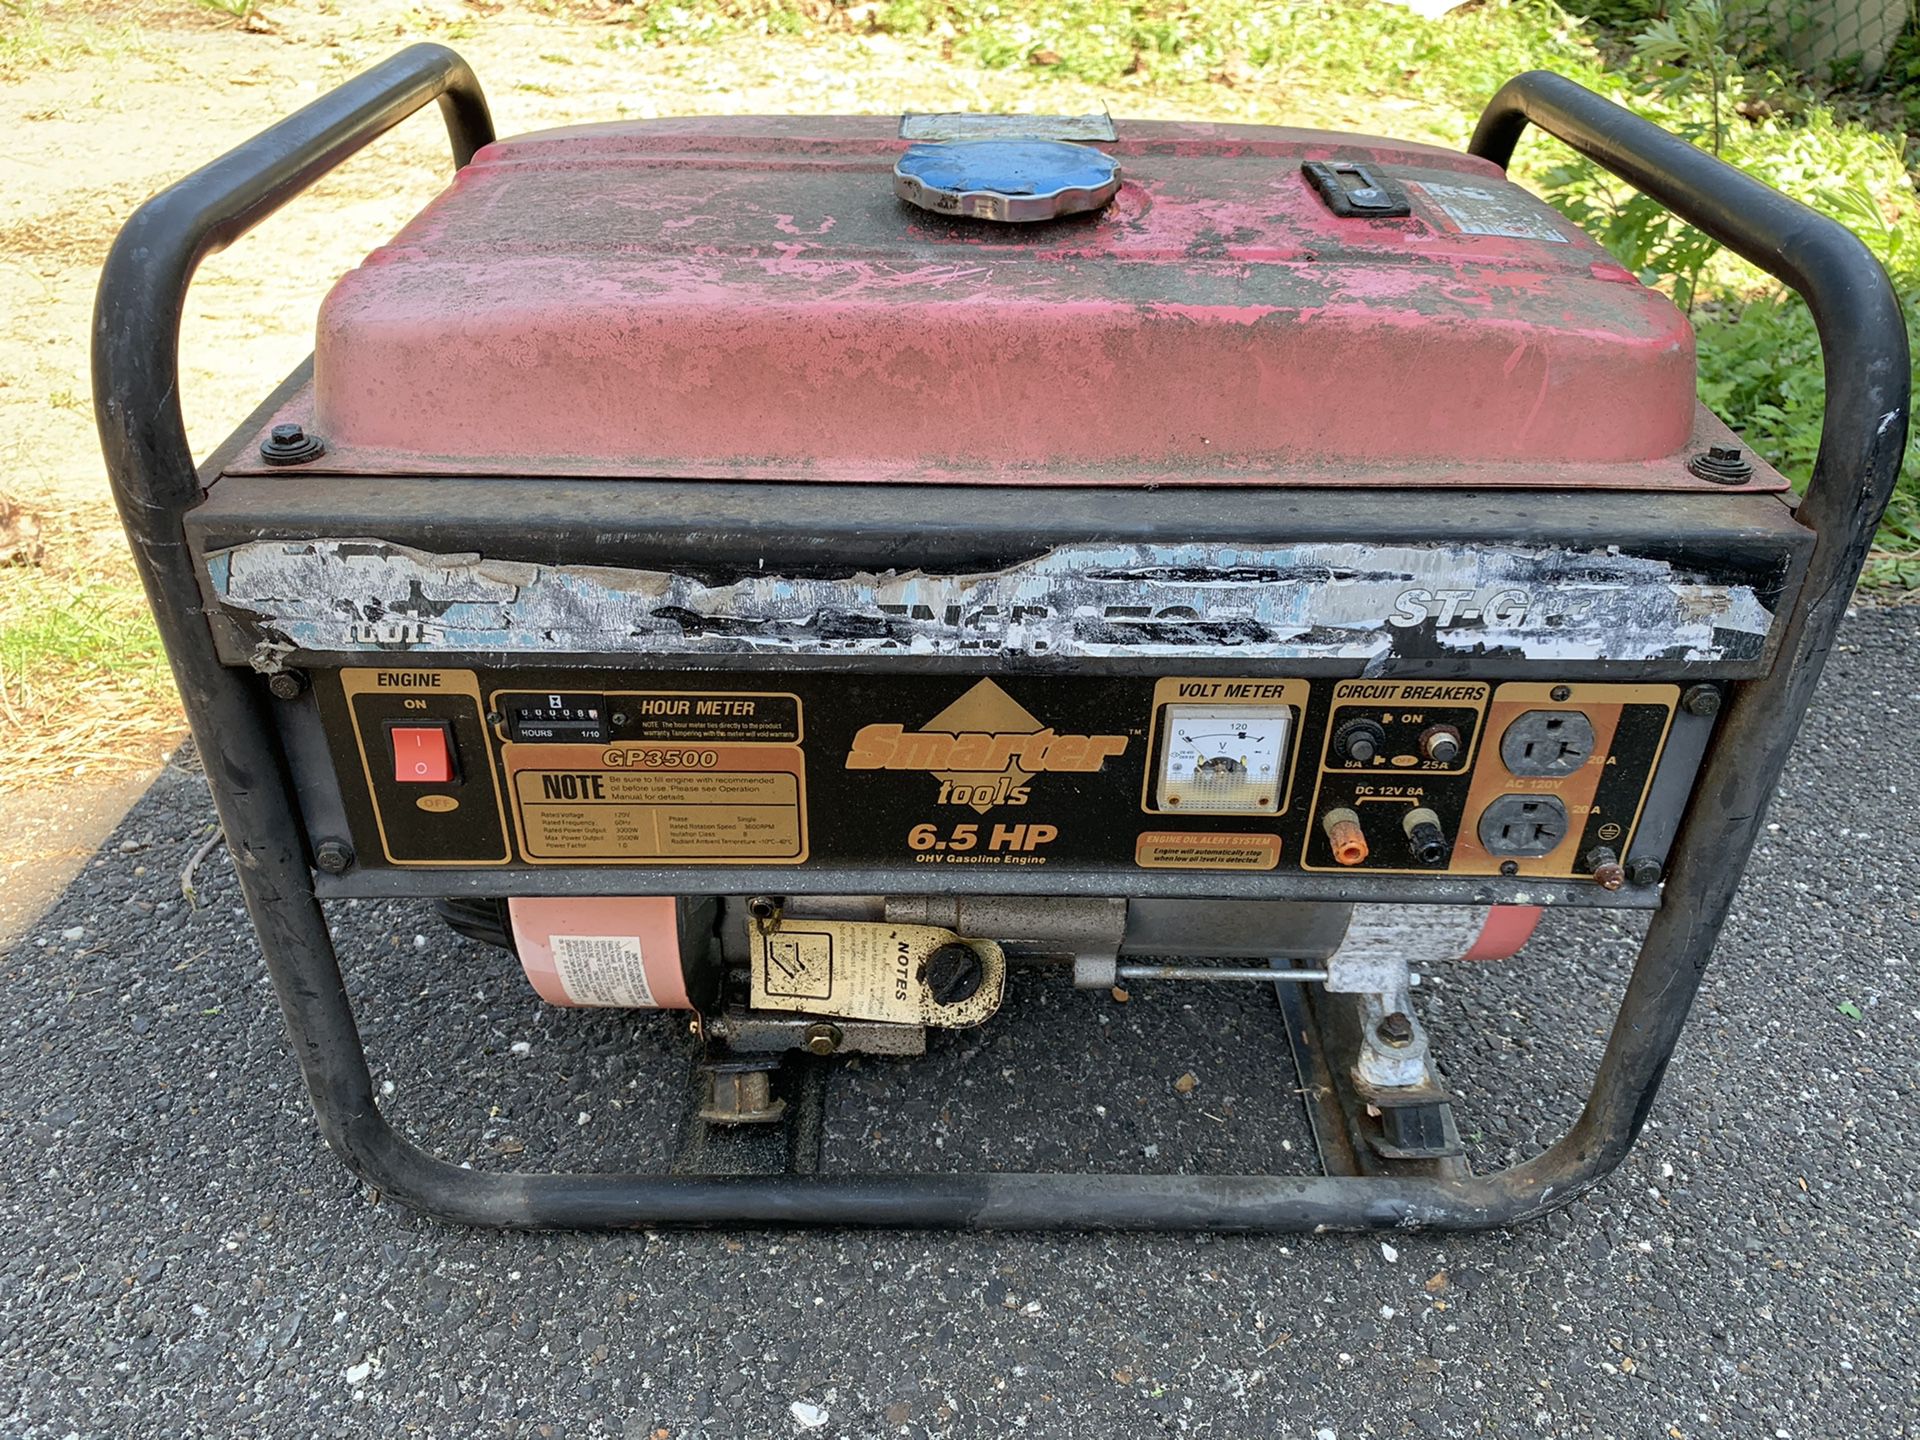 Generator. Needs work. It turn on last summer. Need a carb I need. Don’t know nothing about it